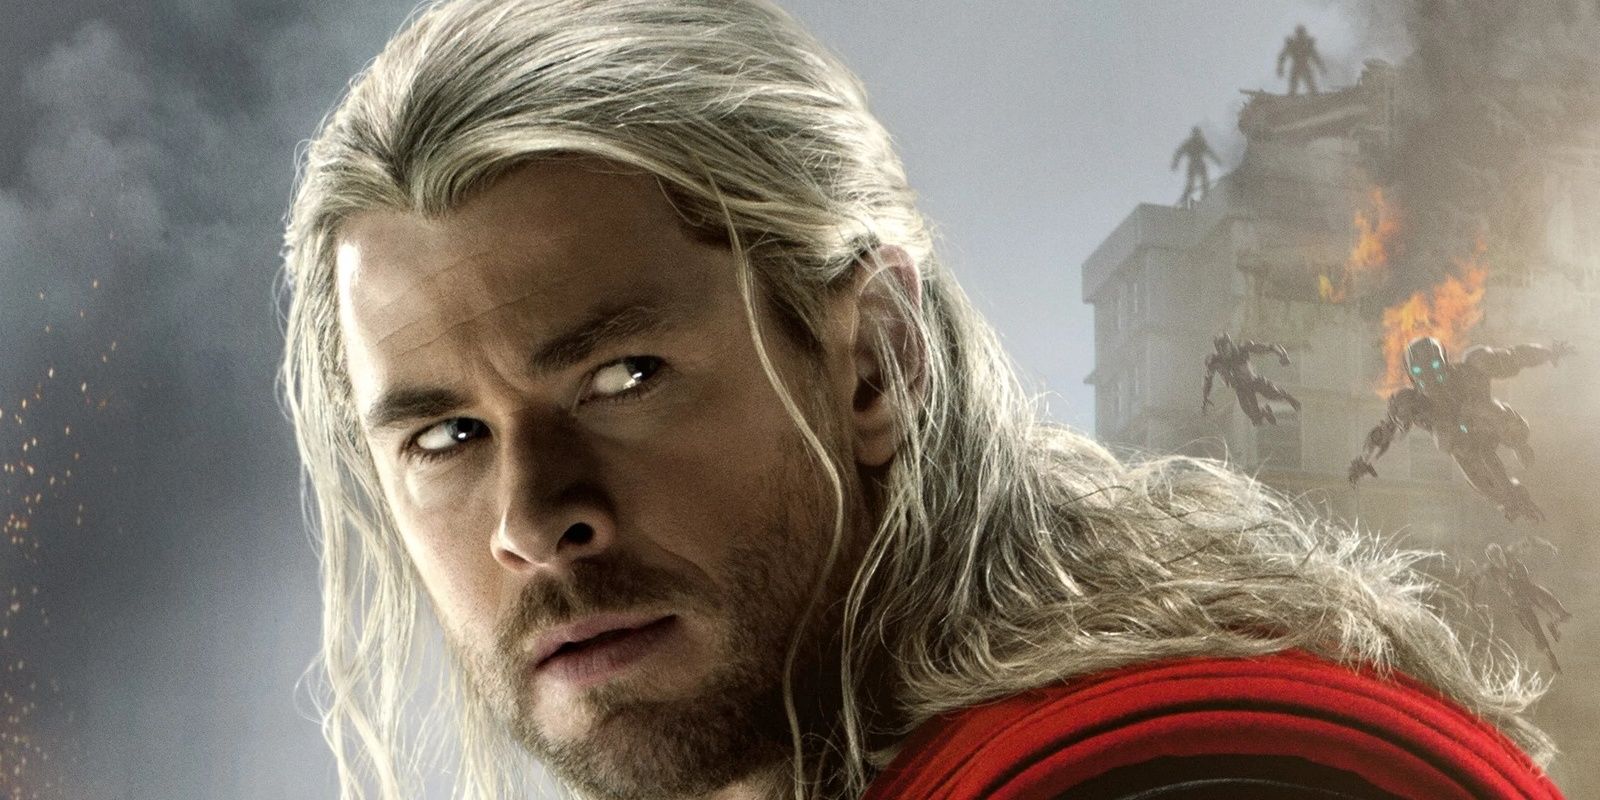 Thor staring off camera on the Age of Ultron poster.